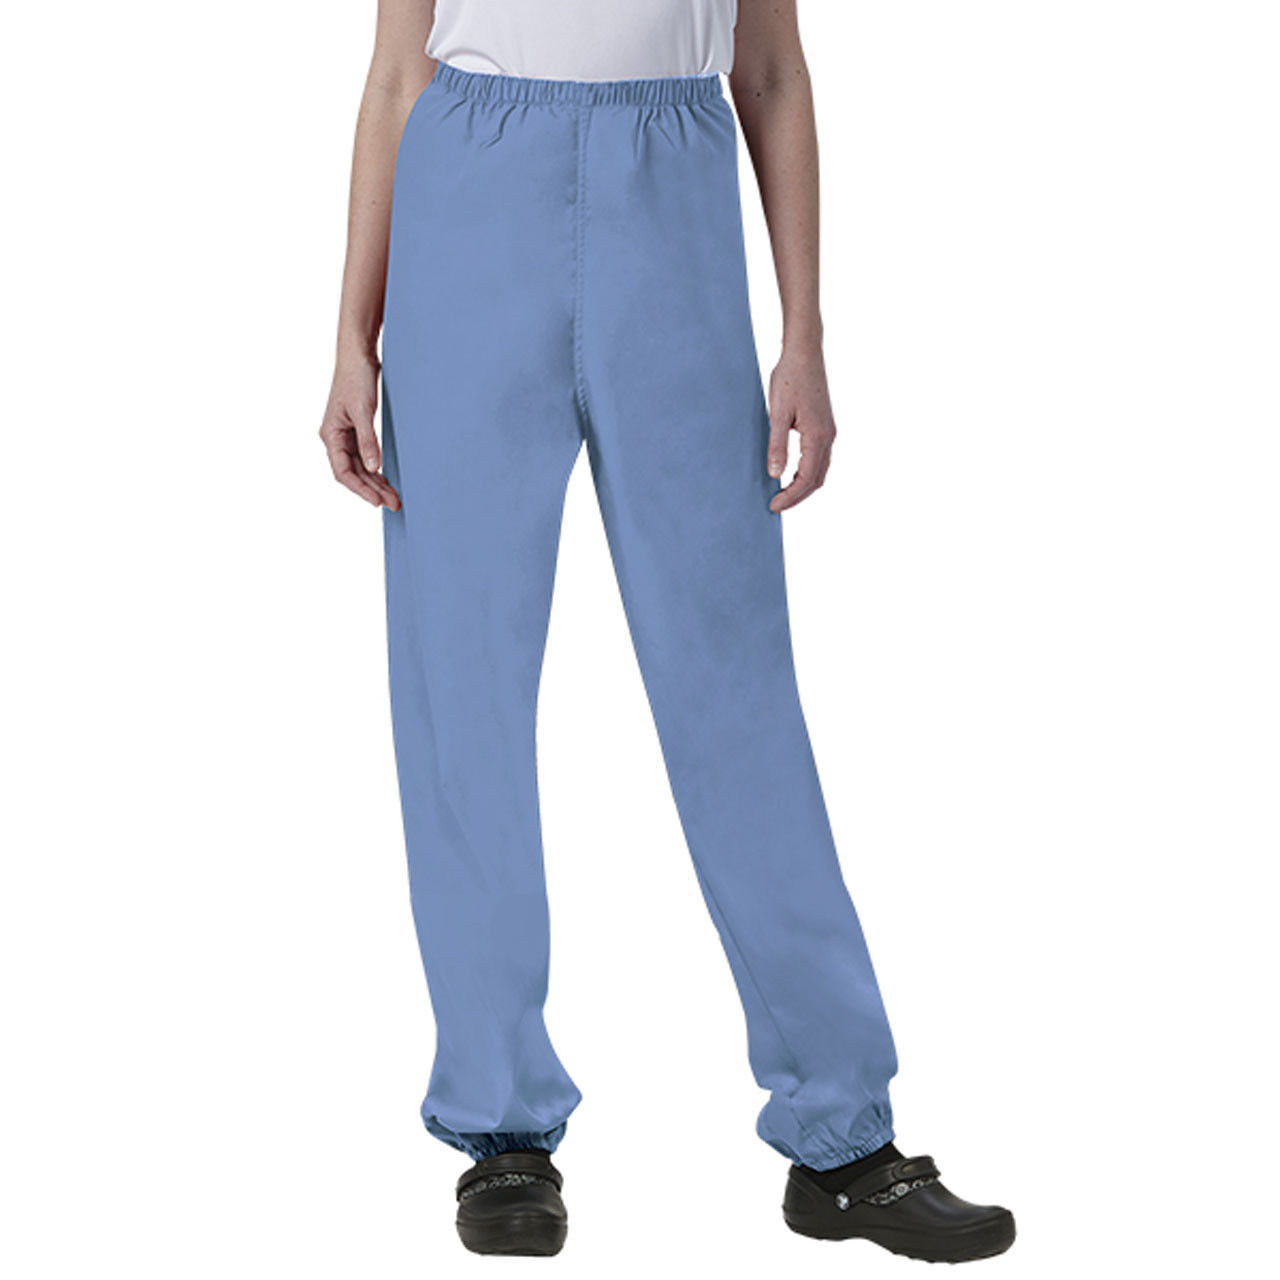 Wholesale Scrub Pants, Elastic, No Pocket, in Ceil Blue, Unisex - Pack of 72 Questions & Answers